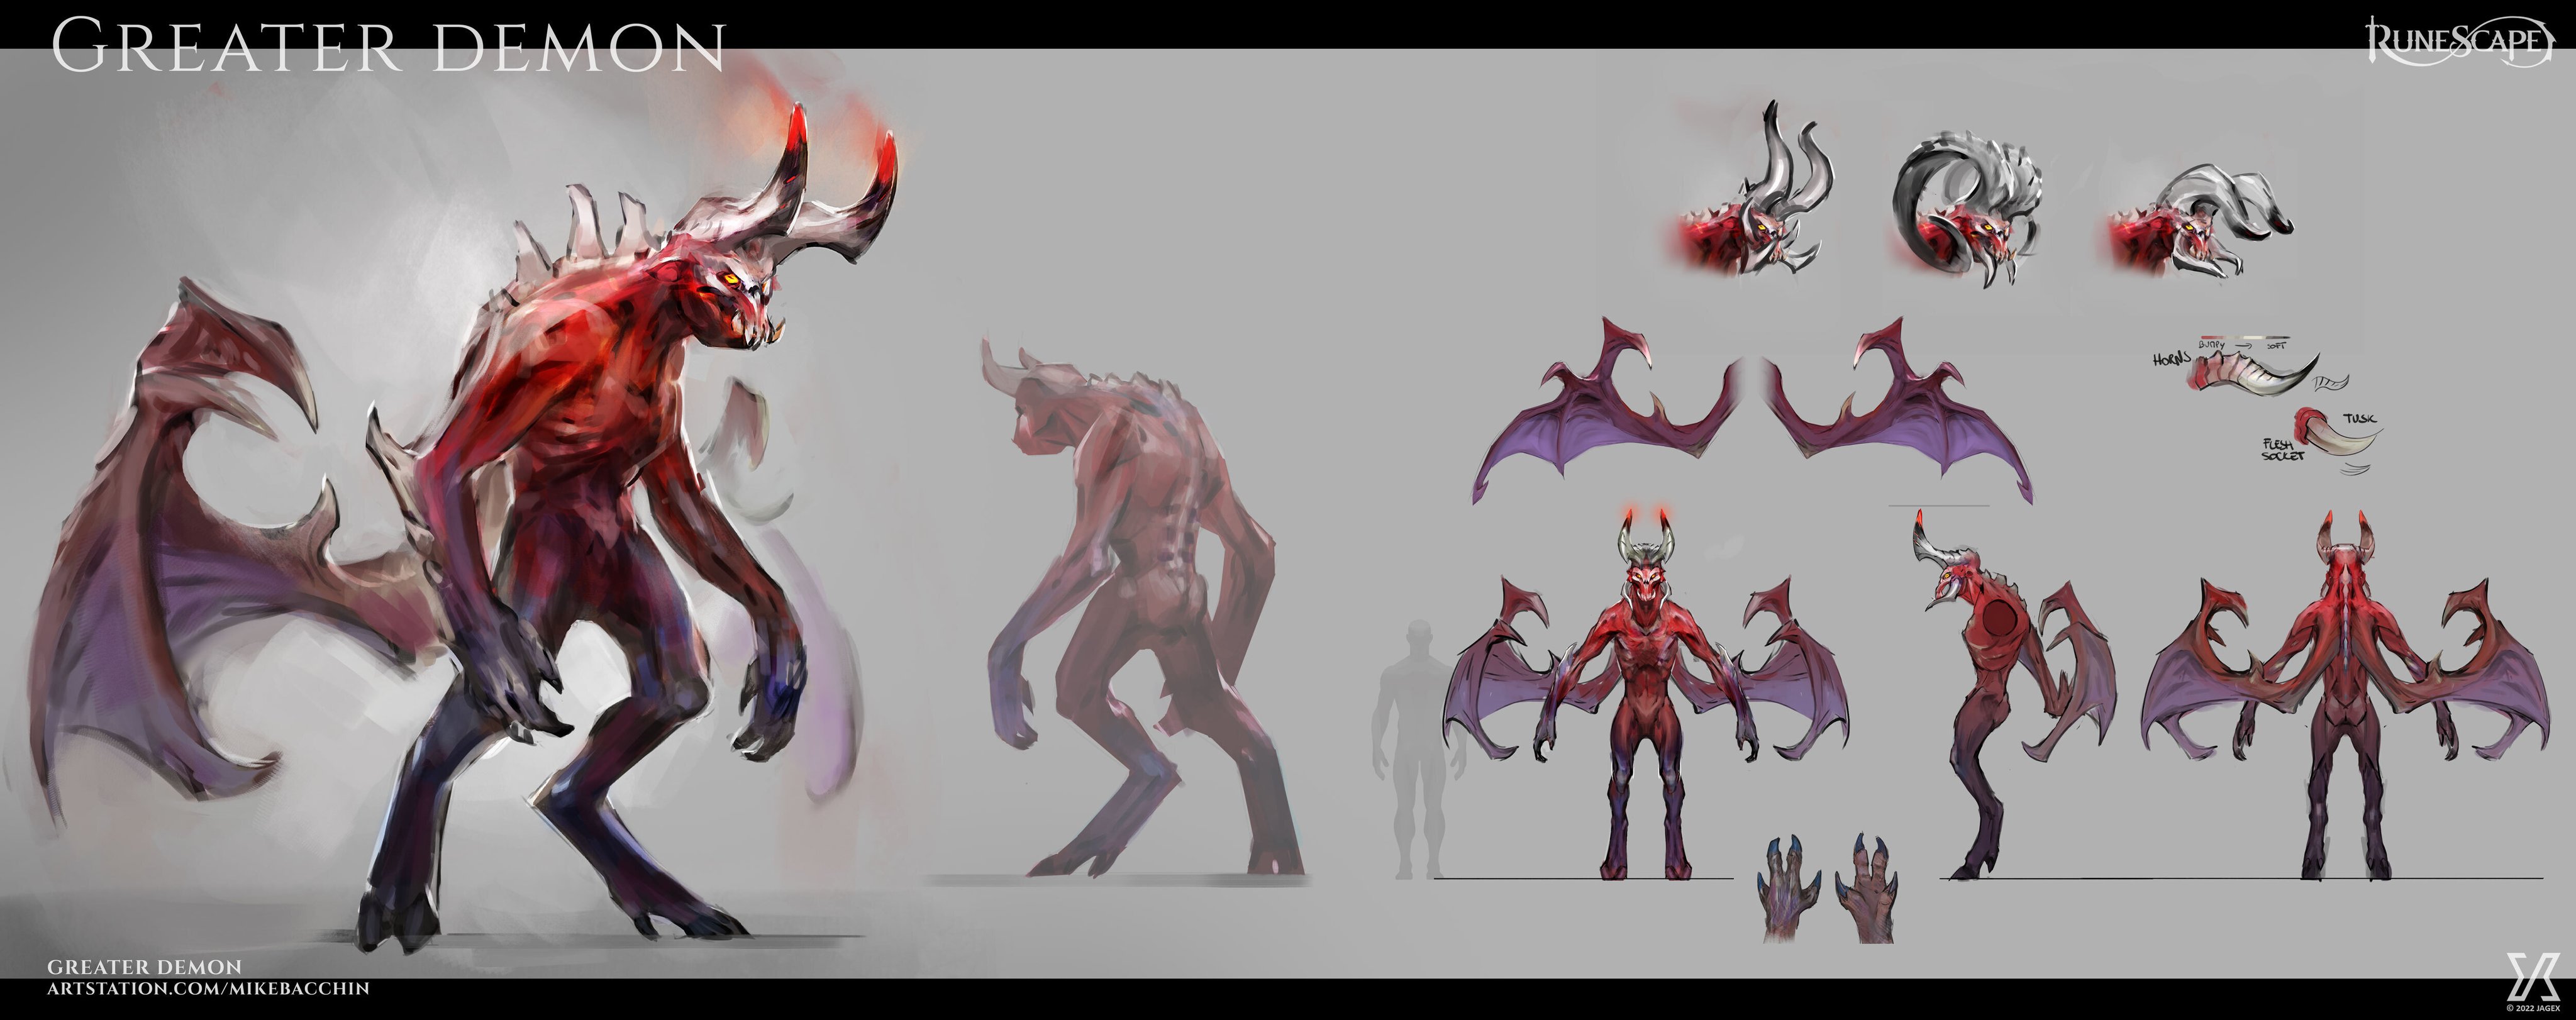 Svinde bort tæt Dyrke motion RuneScape on Twitter: "Here is a sneak peak of some of the work being done  during development of the Zamorak Boss quest! https://t.co/FF70Mr5HNf" /  Twitter